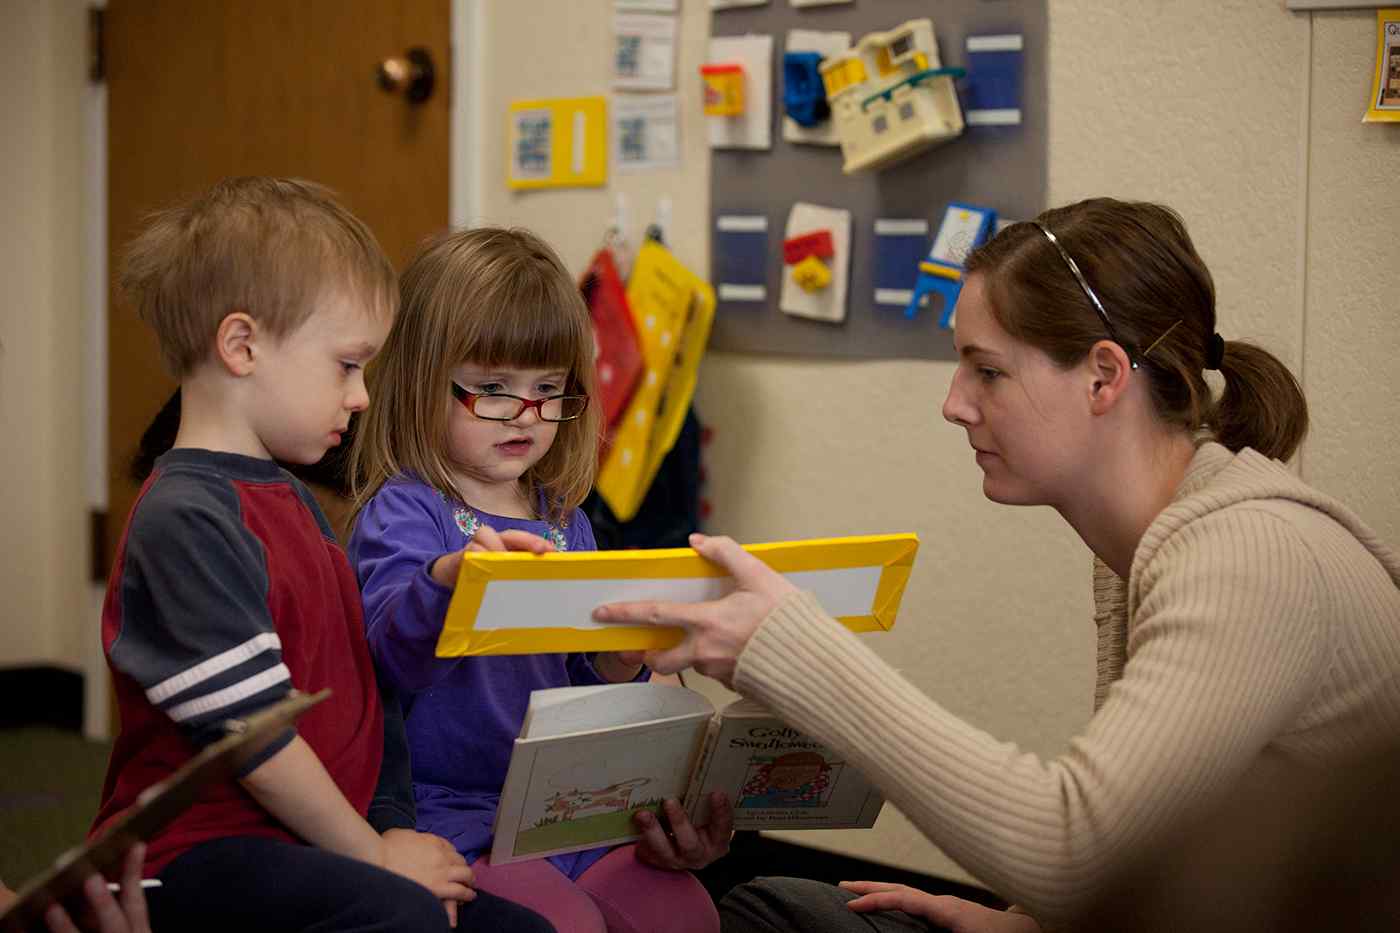 Speech-Language graduate students in the Communication Sciences and Disorders department work with kids at the clinic.